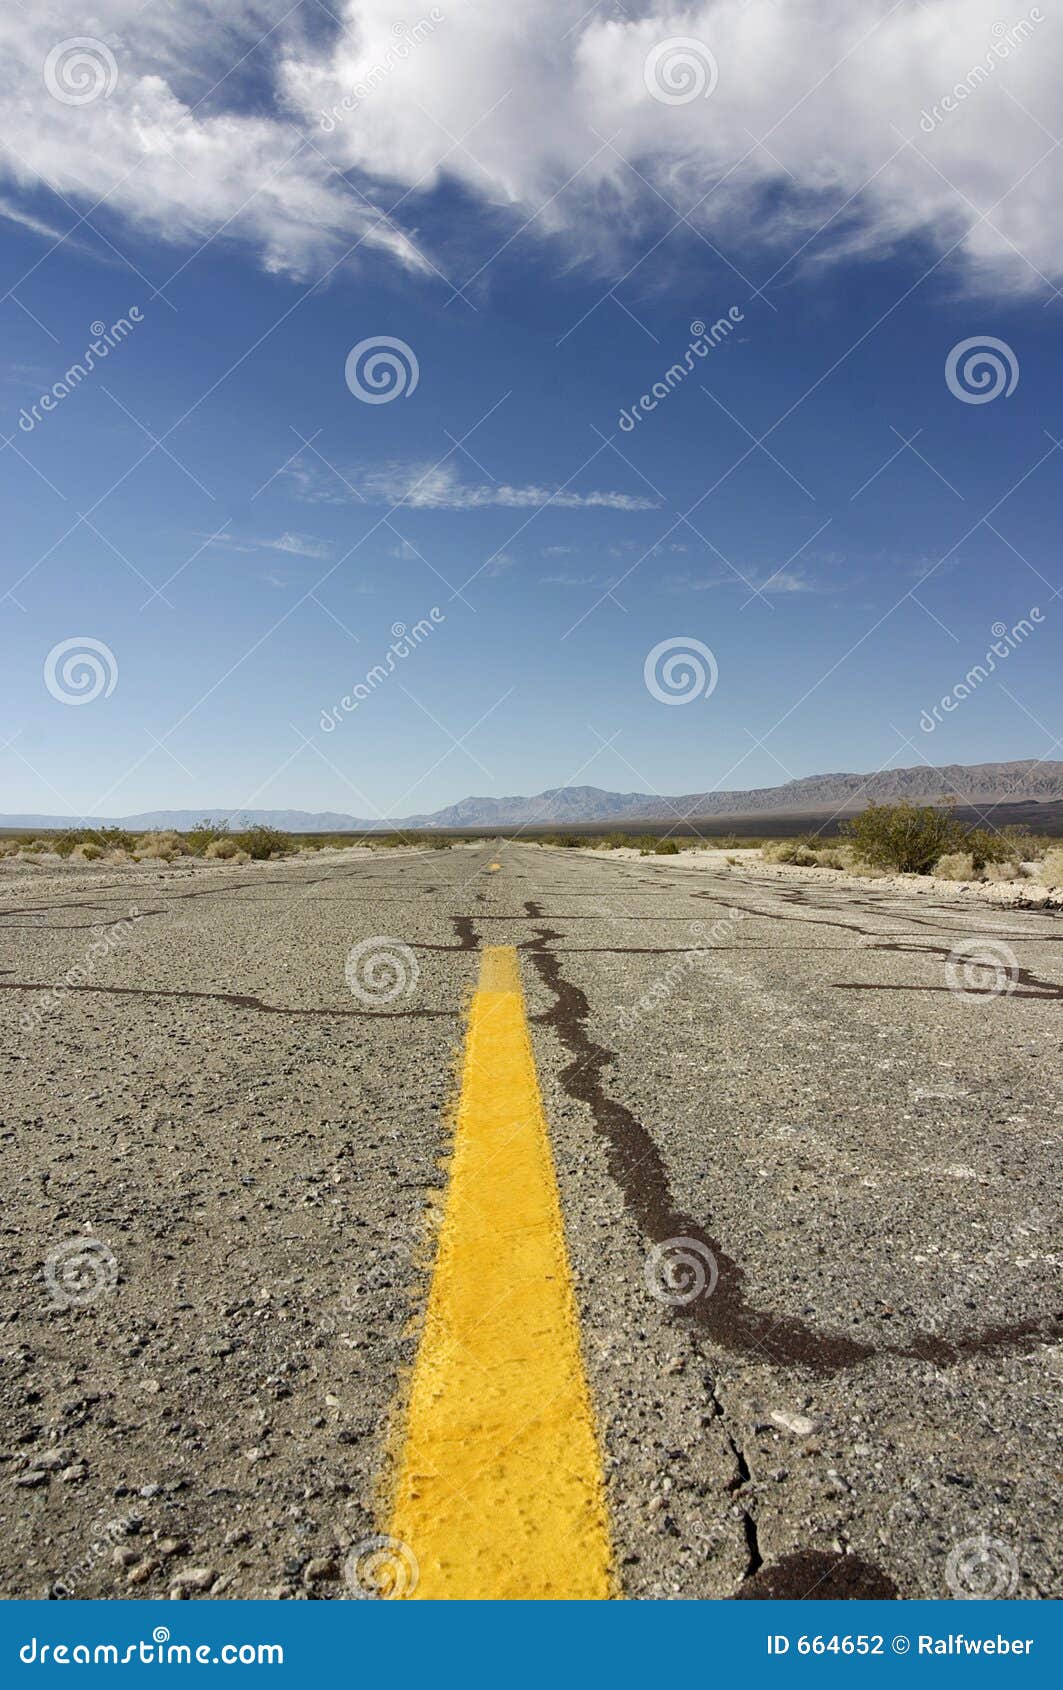 Endless Road Stock Photography - Image: 664652